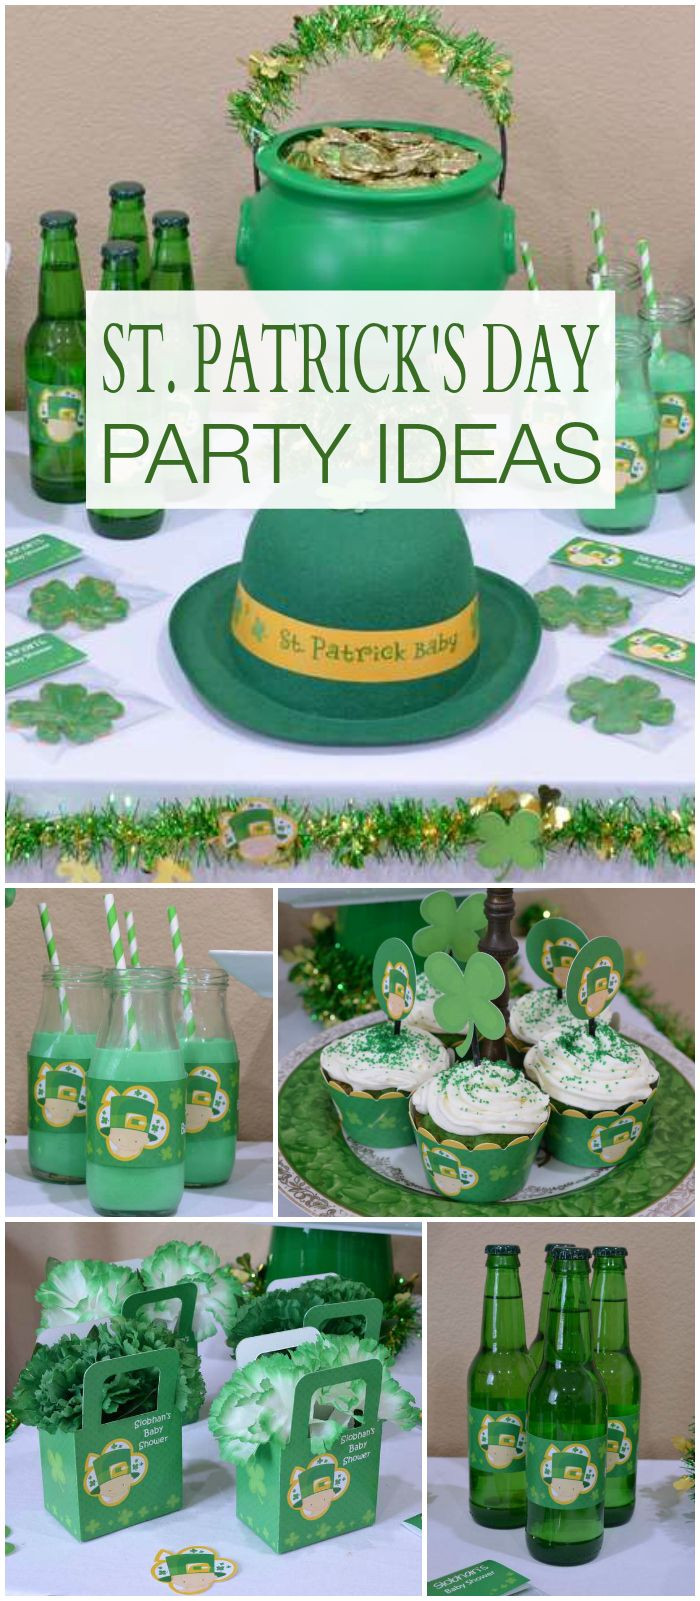 Ideas For St Patrick's Day Party
 251 best images about St Patrick s Day Party Ideas on